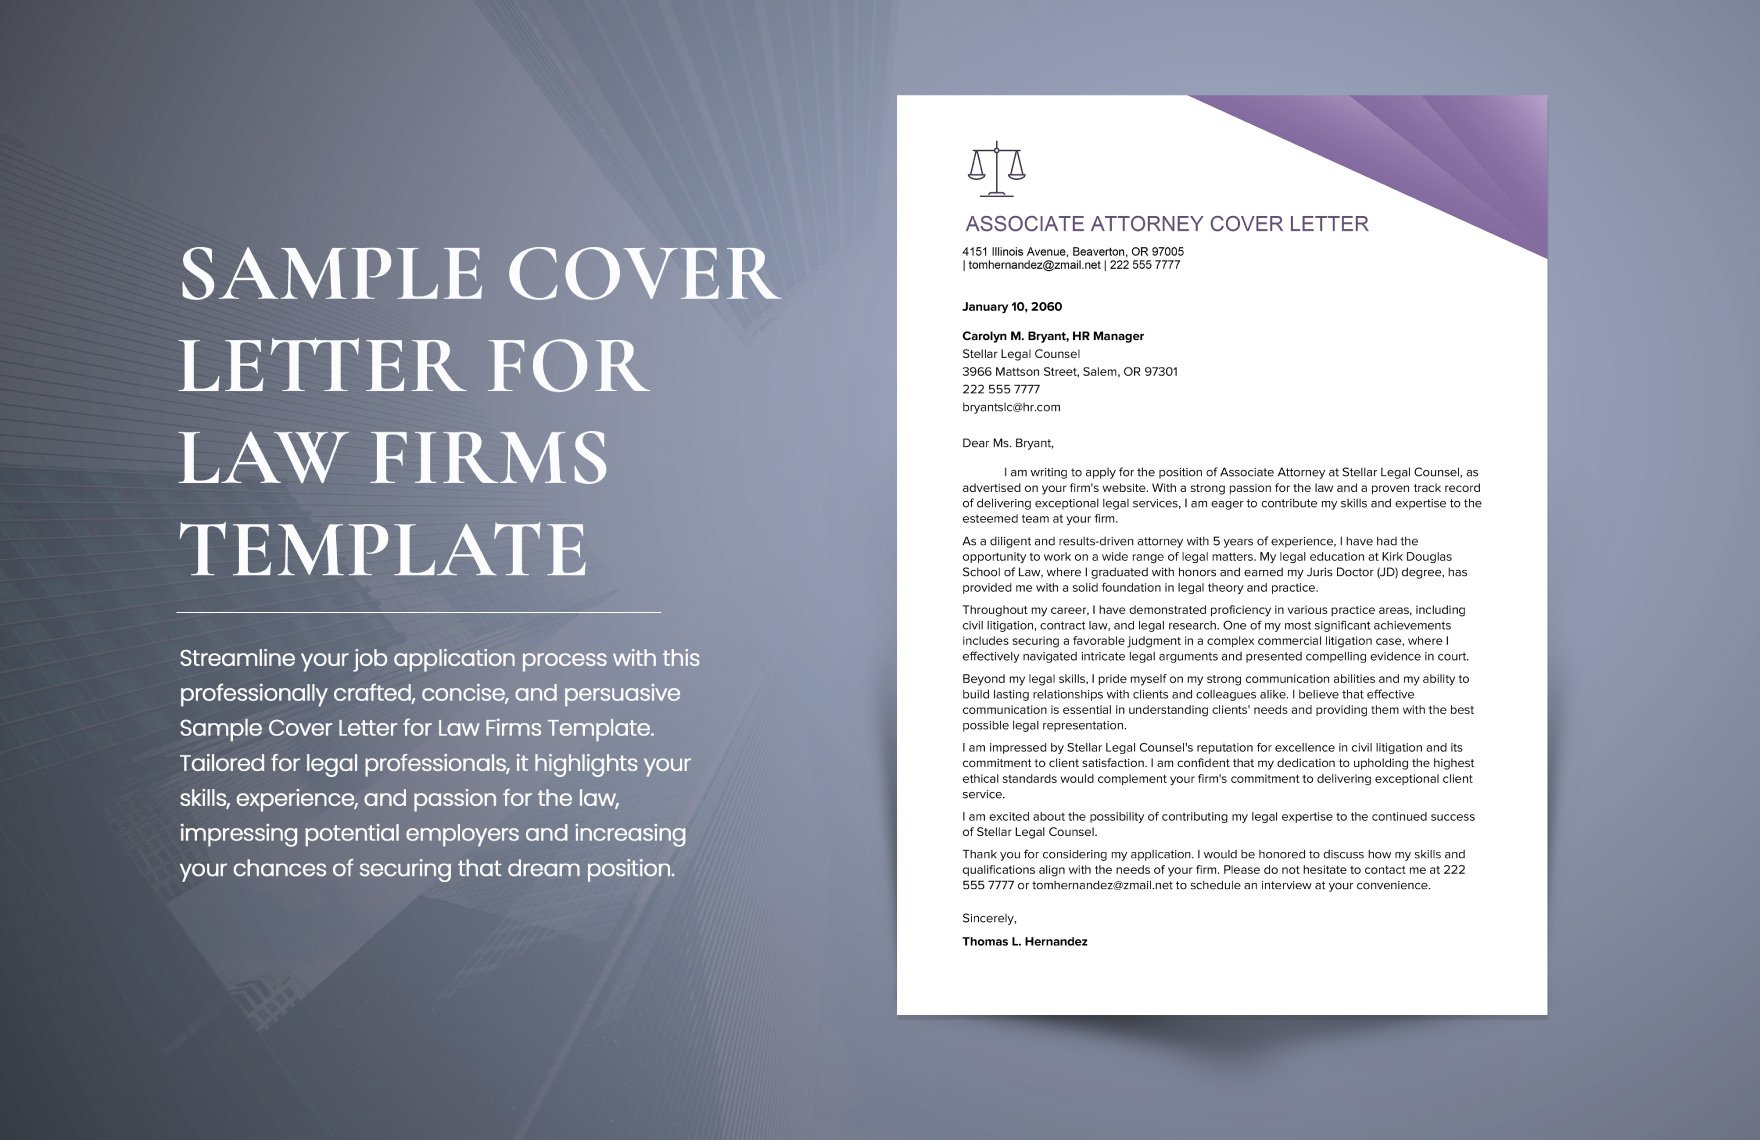 sample-cover-letter-for-law-firms-template